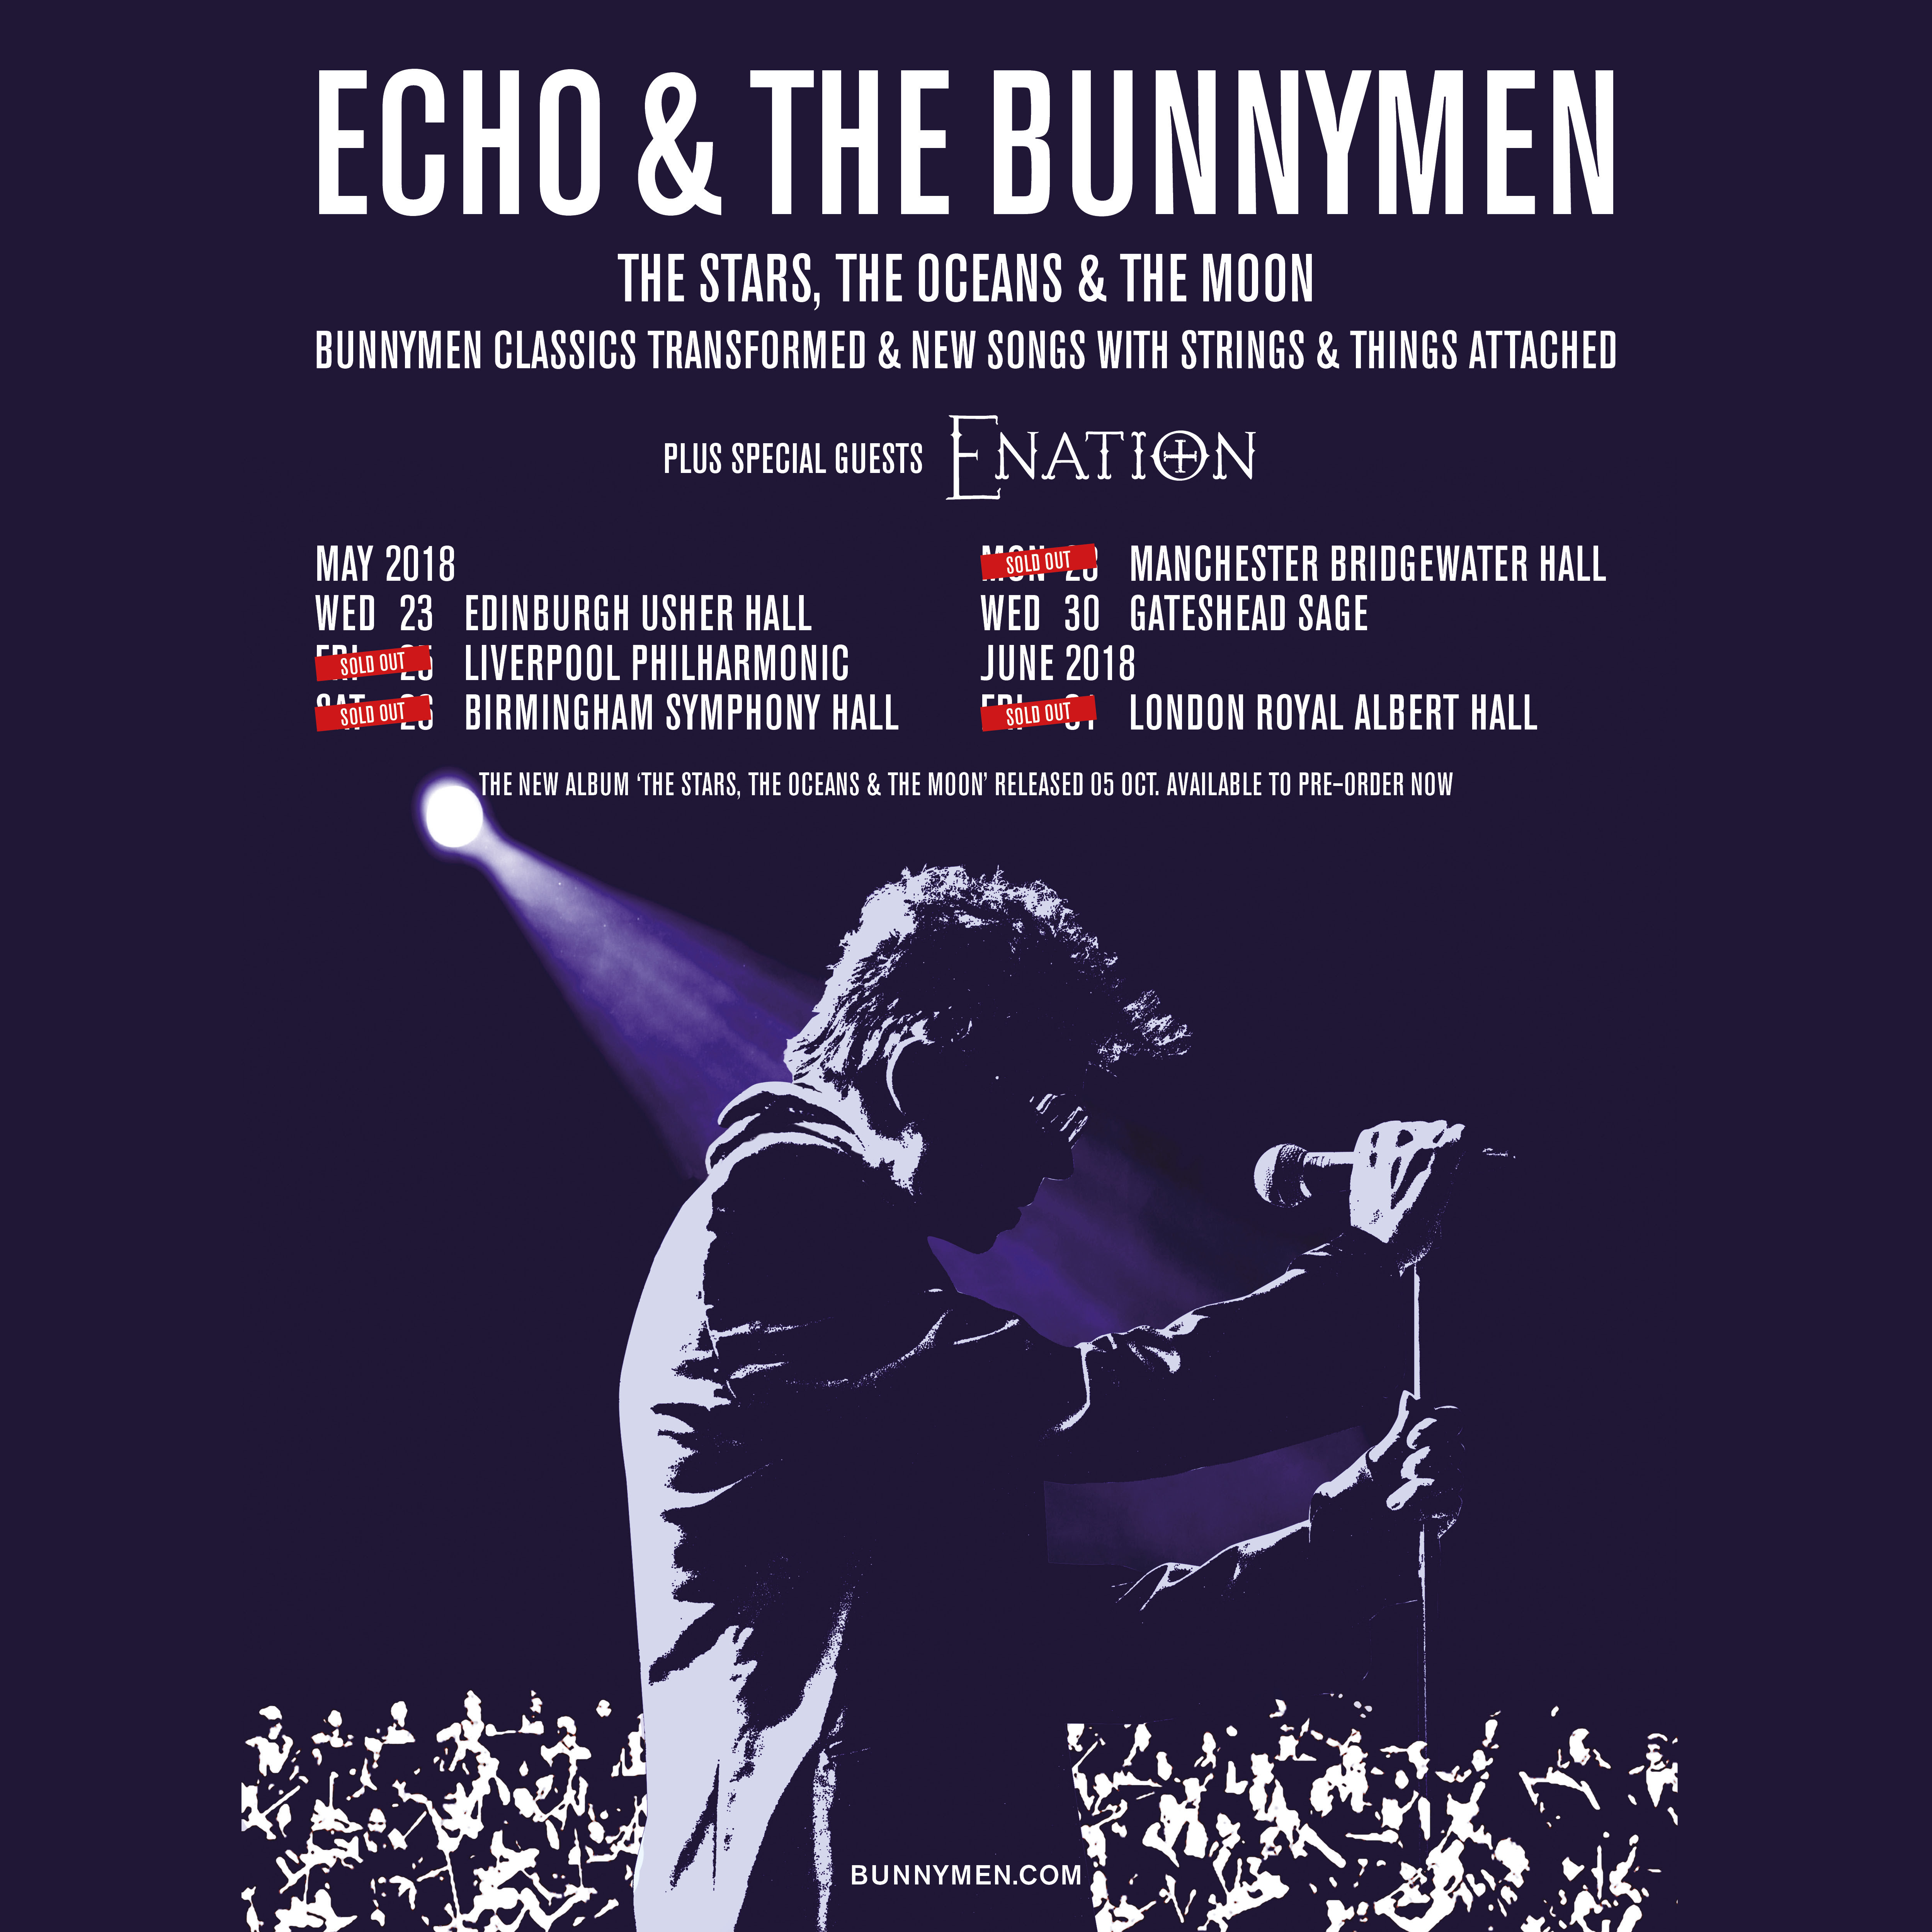 echo and bunnymen tour review